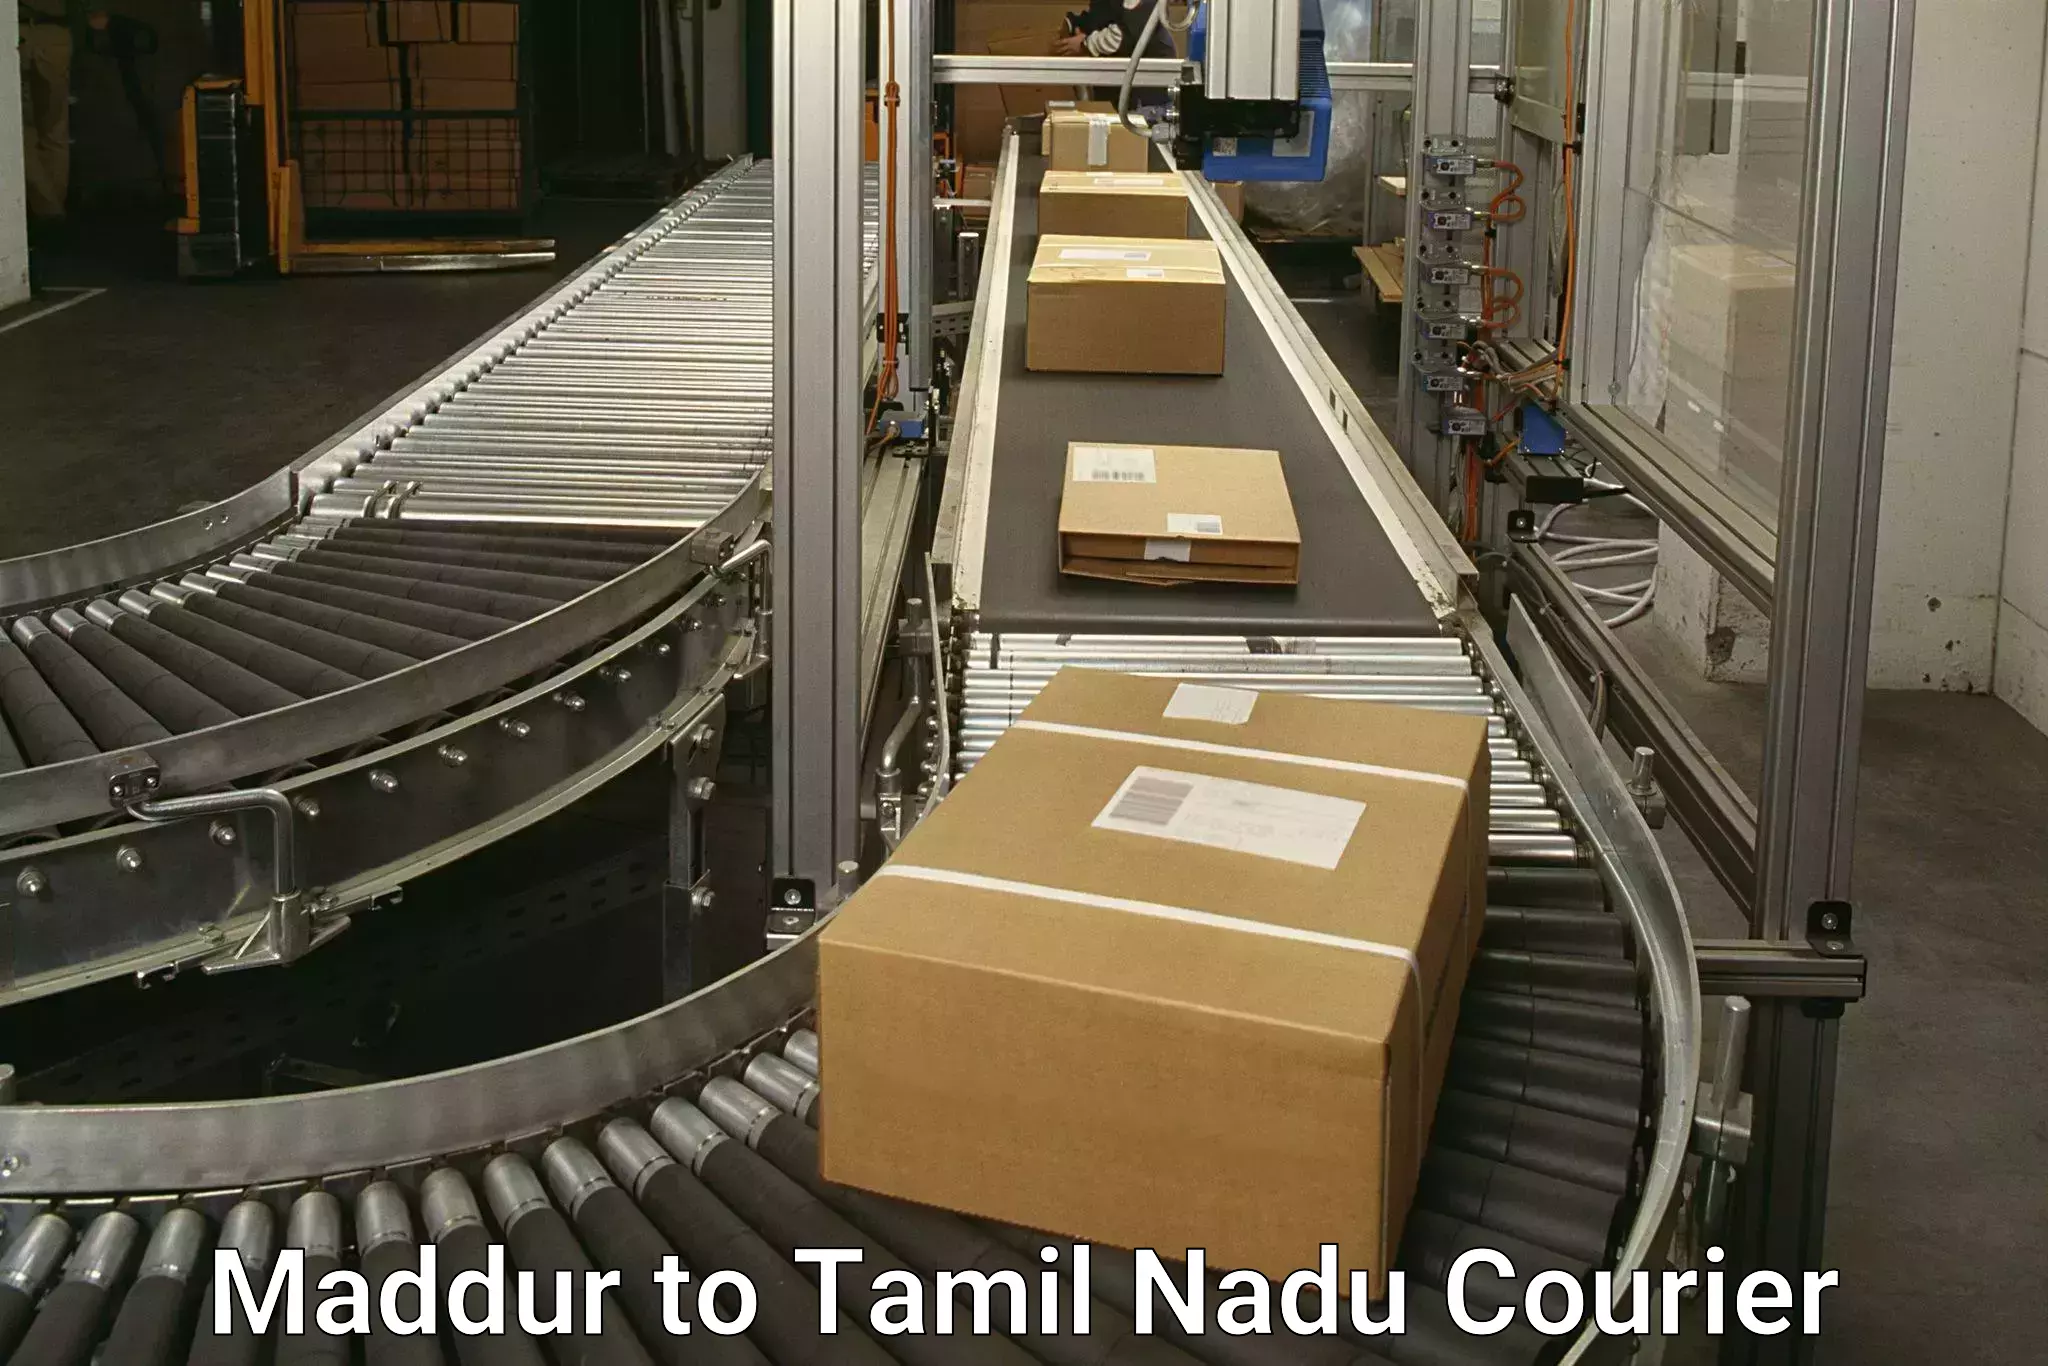 Express delivery capabilities Maddur to Ottapidaram